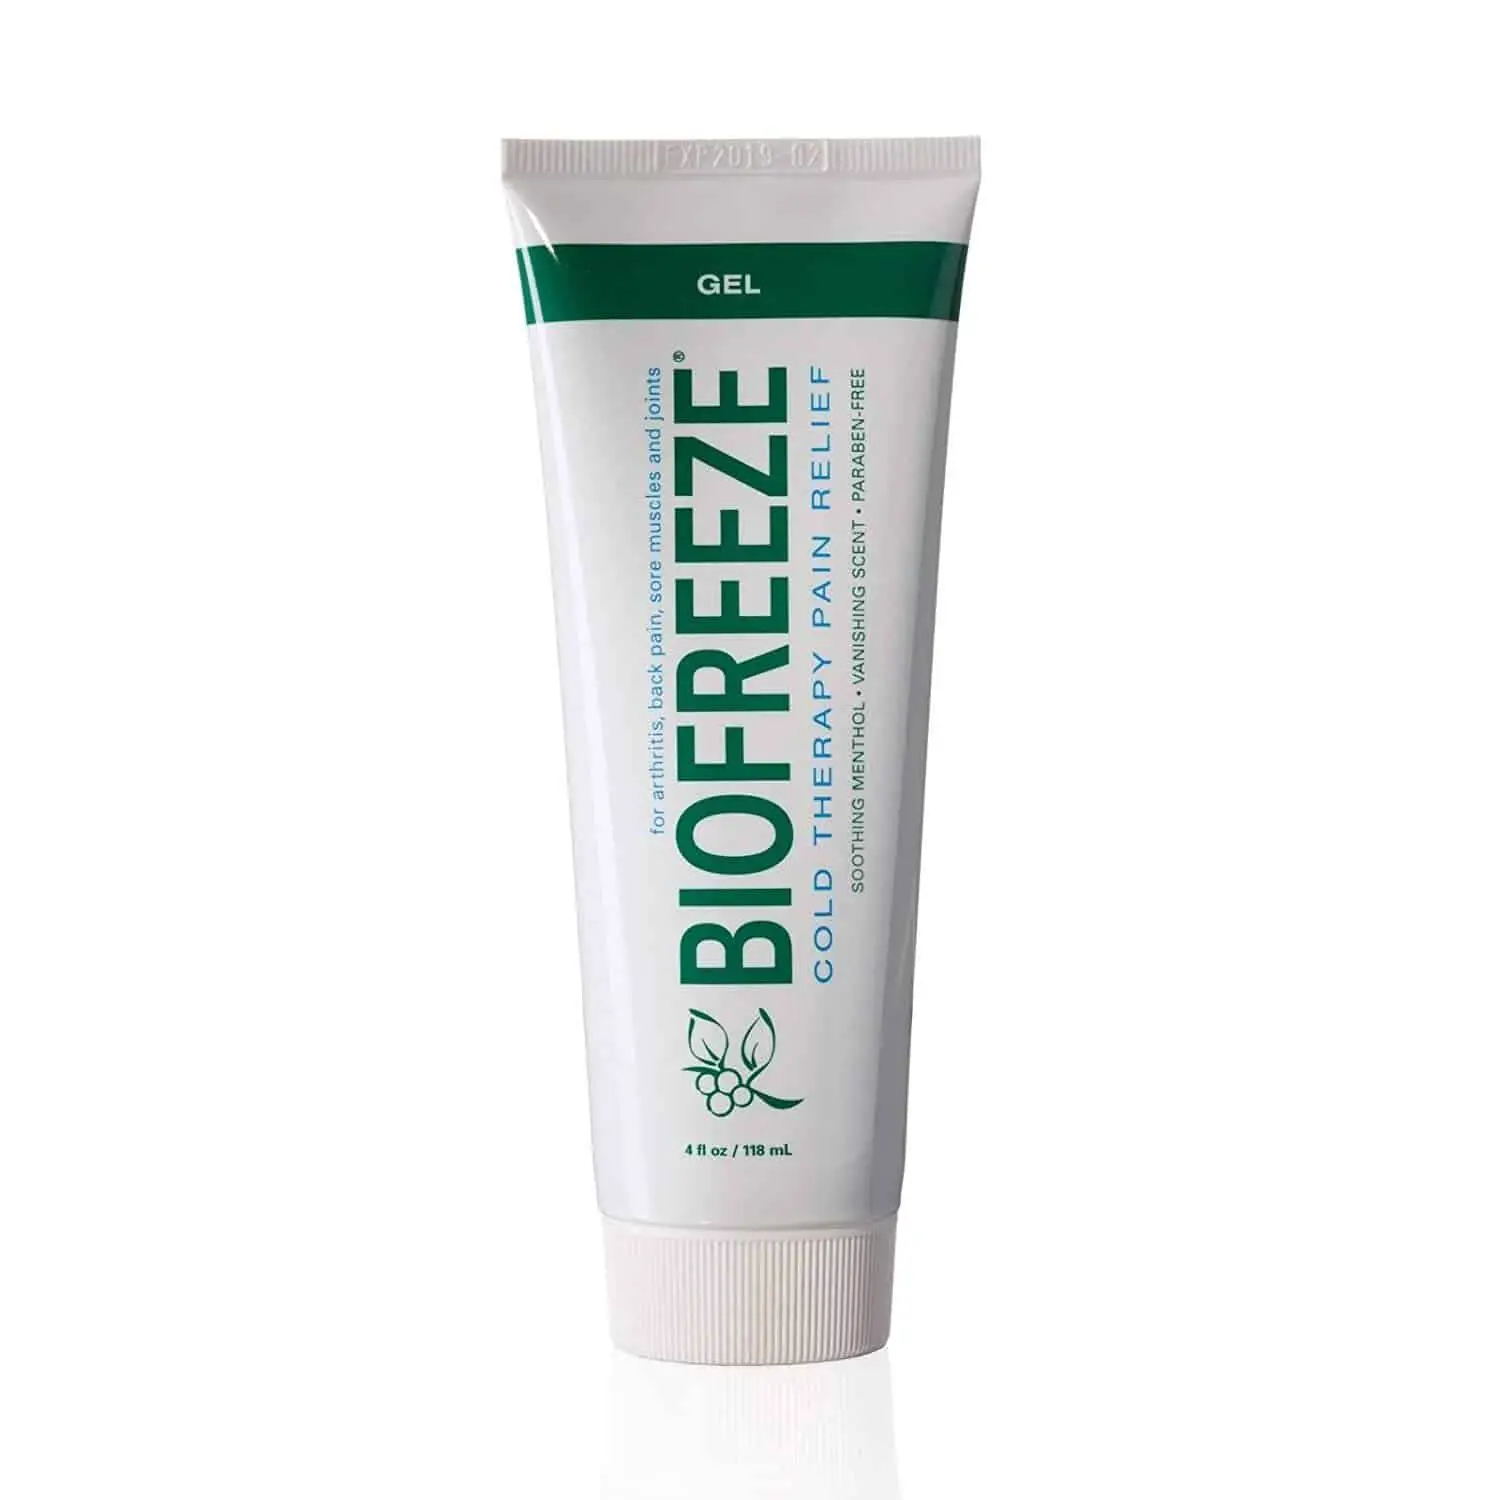 BIOFREEZE Pain Relief Gel, 4 oz. Tube, Fast Acting and Long Lasting ...